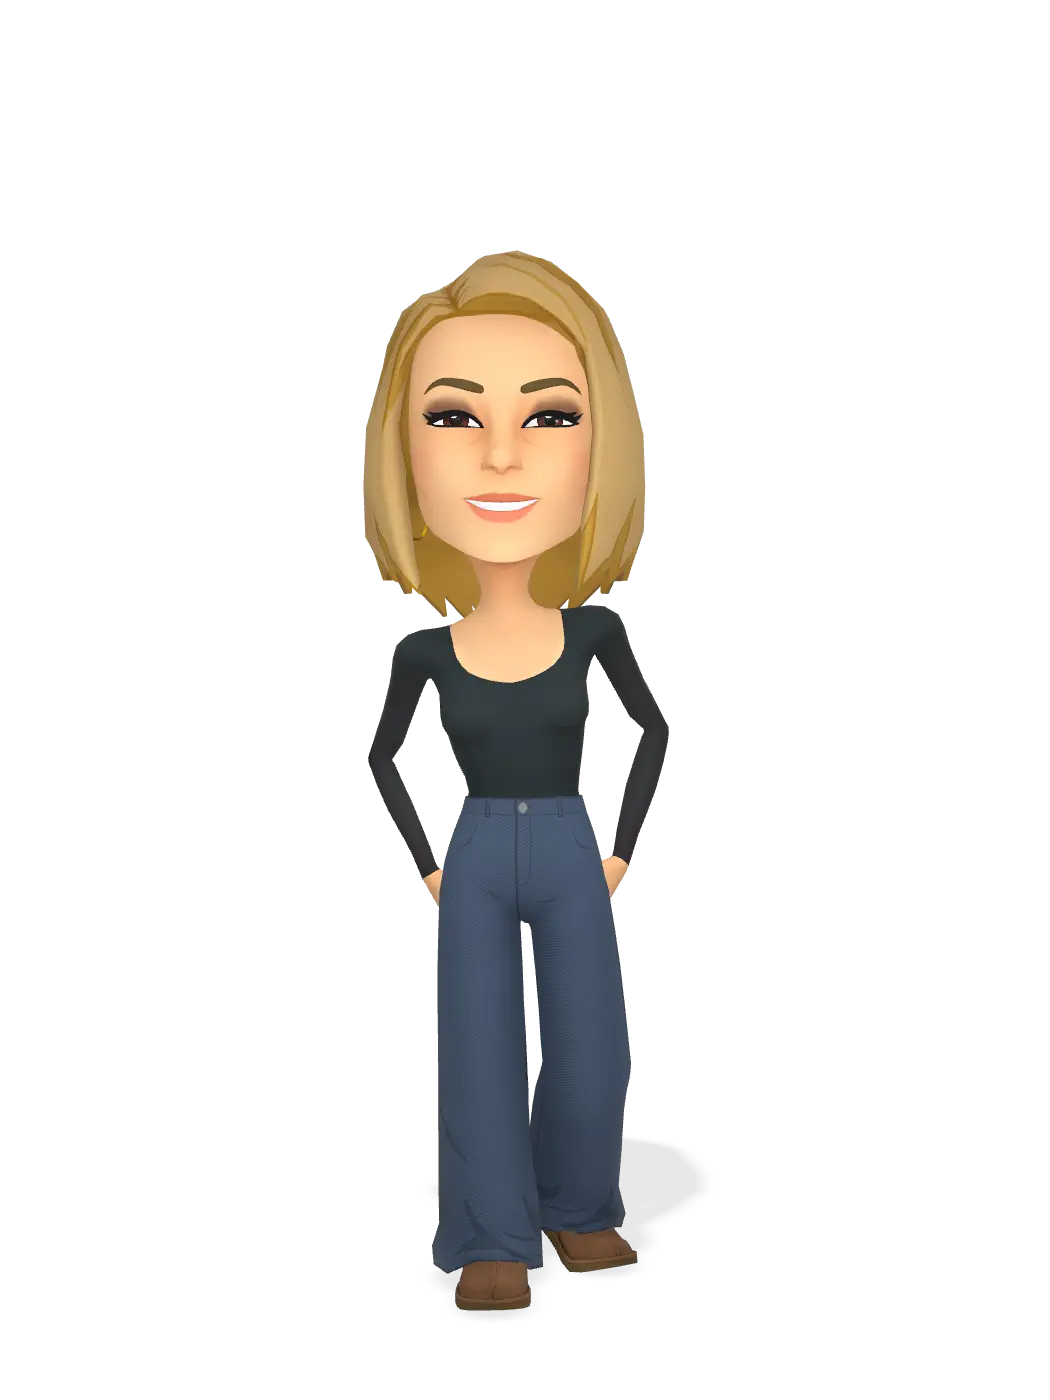 3D Bitmoji for oursnappyhour